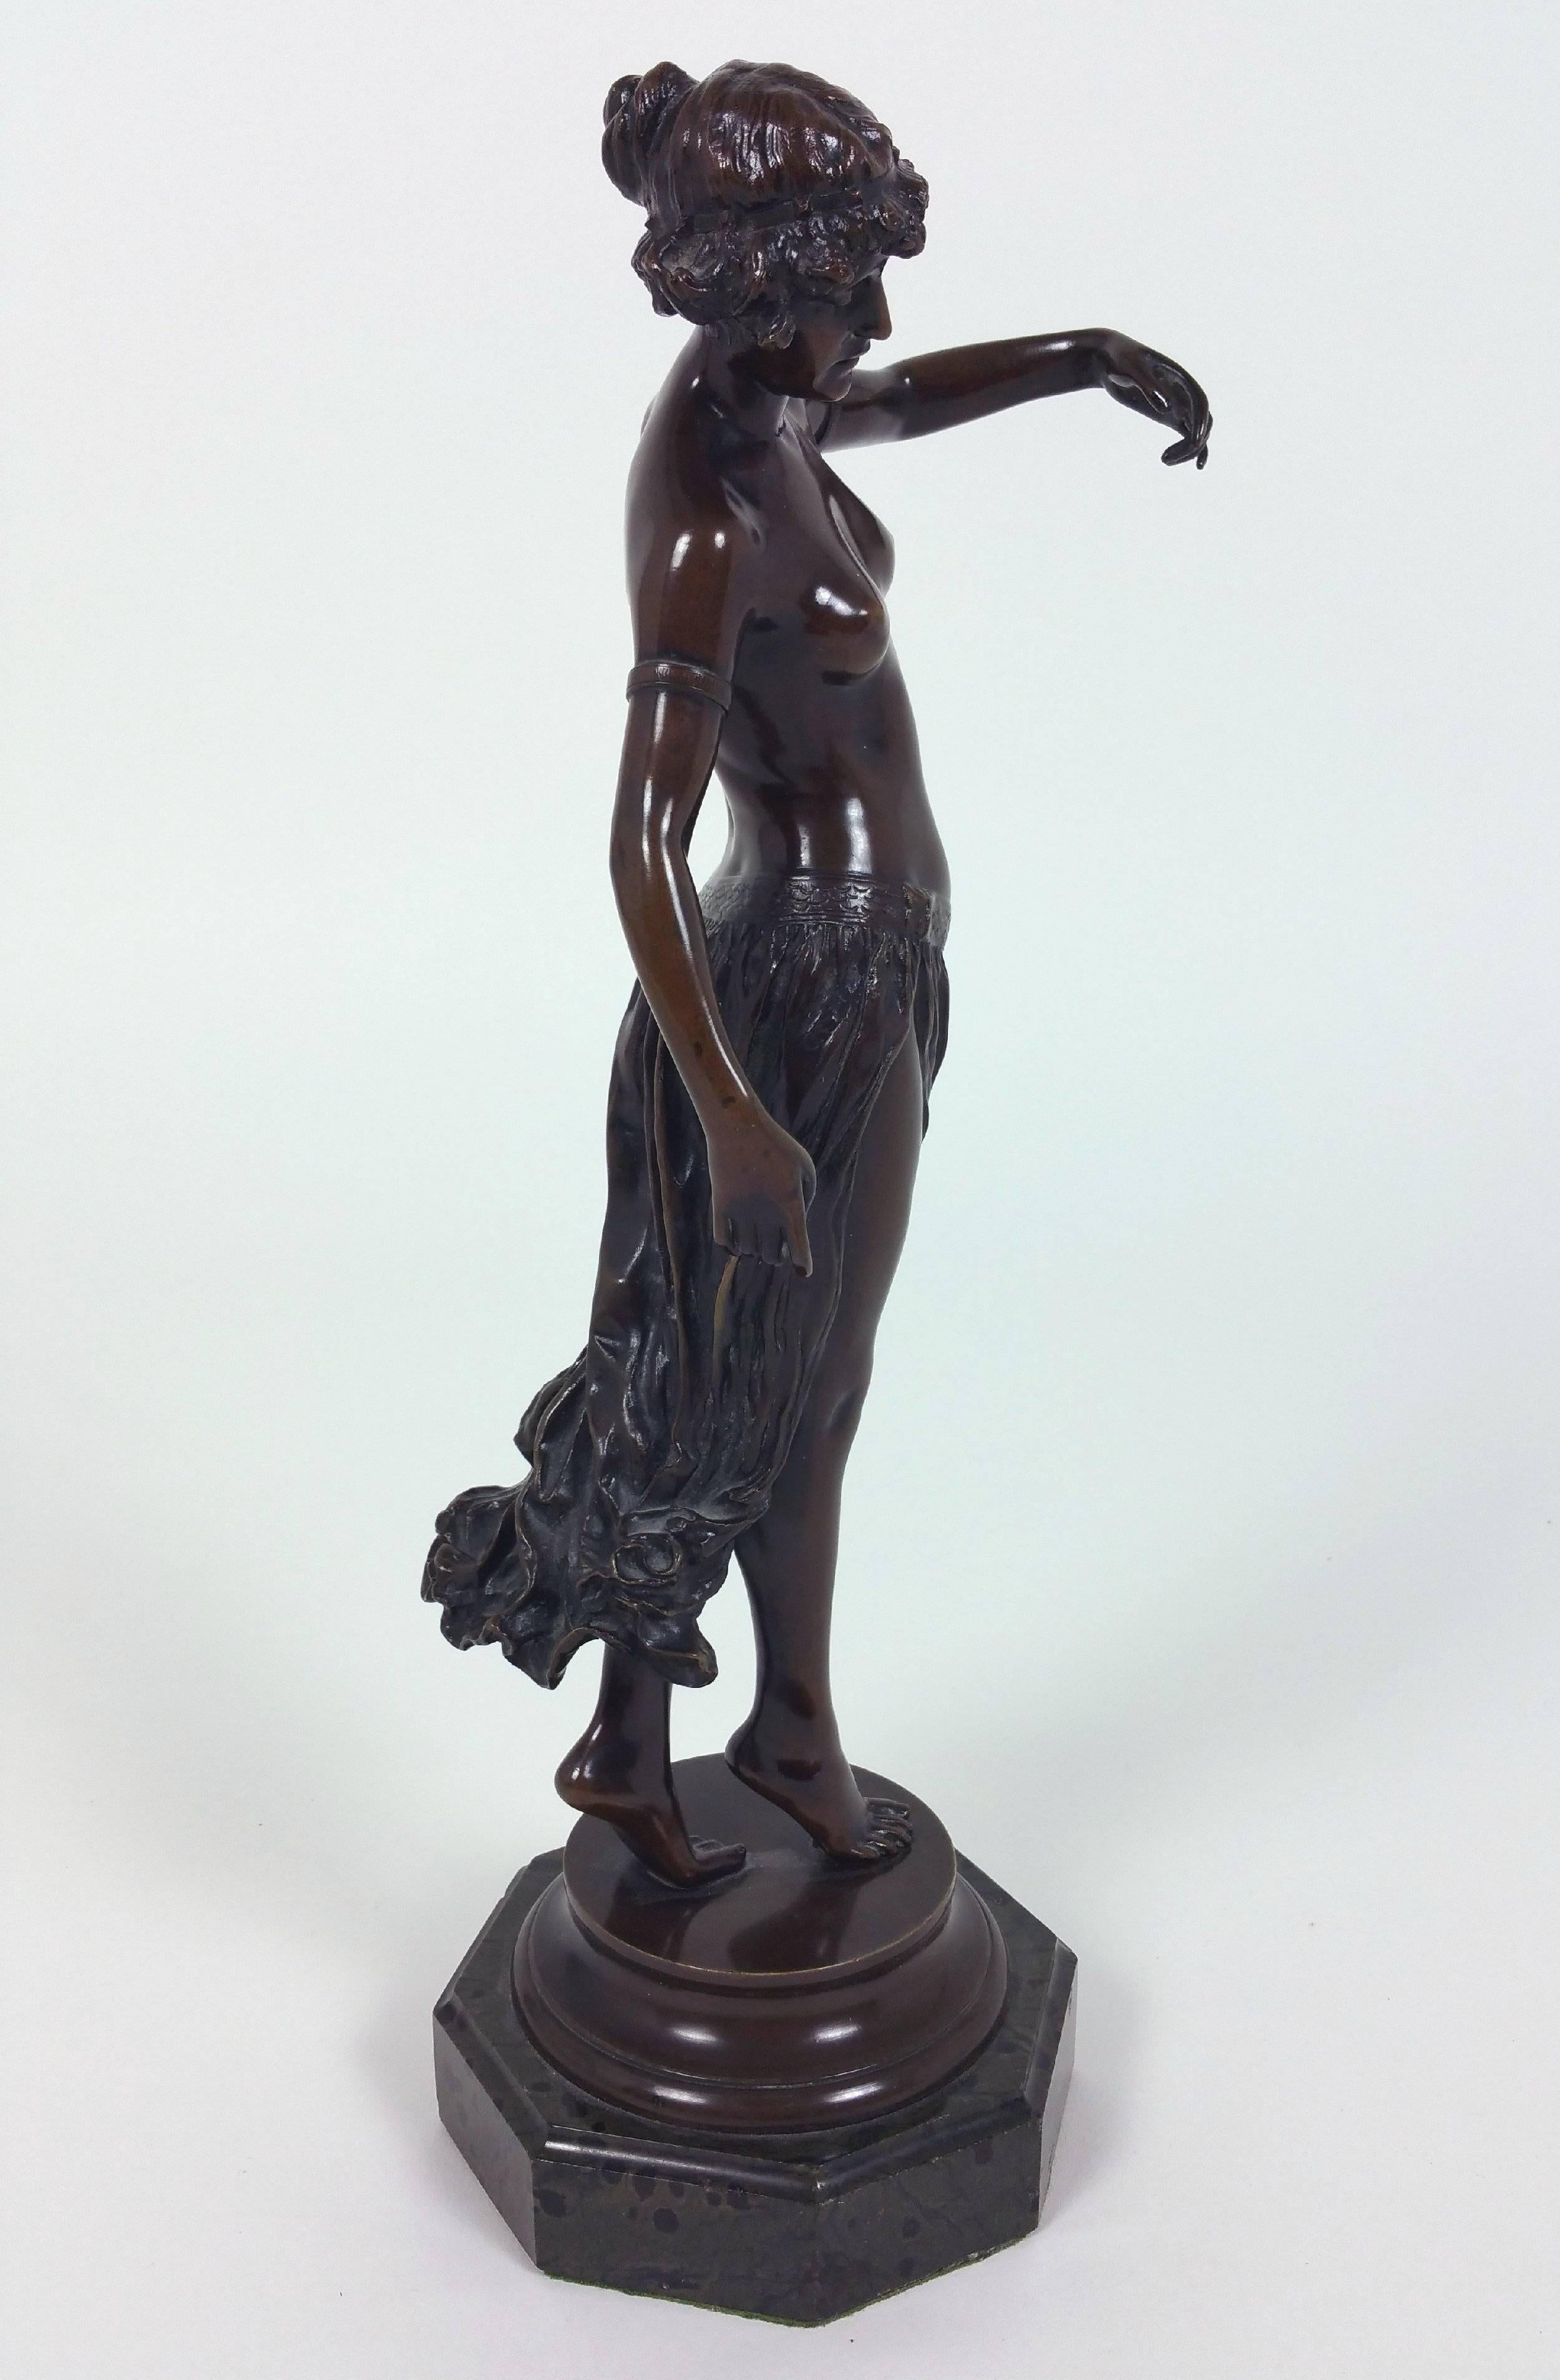 This angelic and gracefully poised bronze figure was done by Edward Onslow Ford, and is signed Onslow Ford on the plinth. This fine patinated bronze depicts a semi naked dancer, standing on a circular bronze plinth and mounted on an octagonal marble